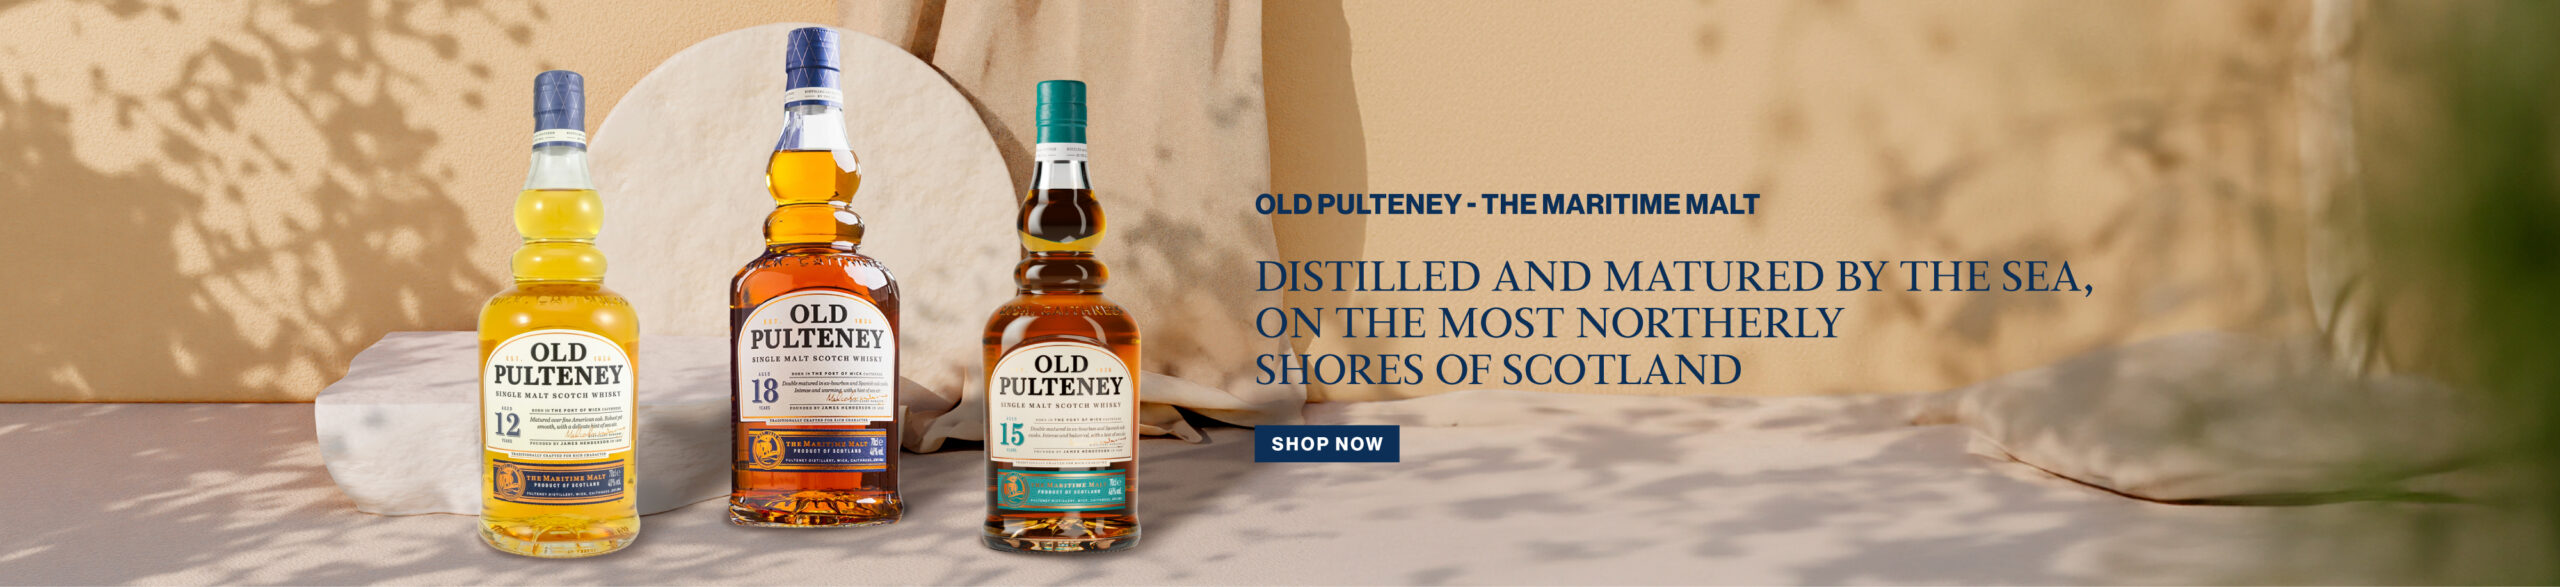 OLD PULTENEY-1920 × 440_01